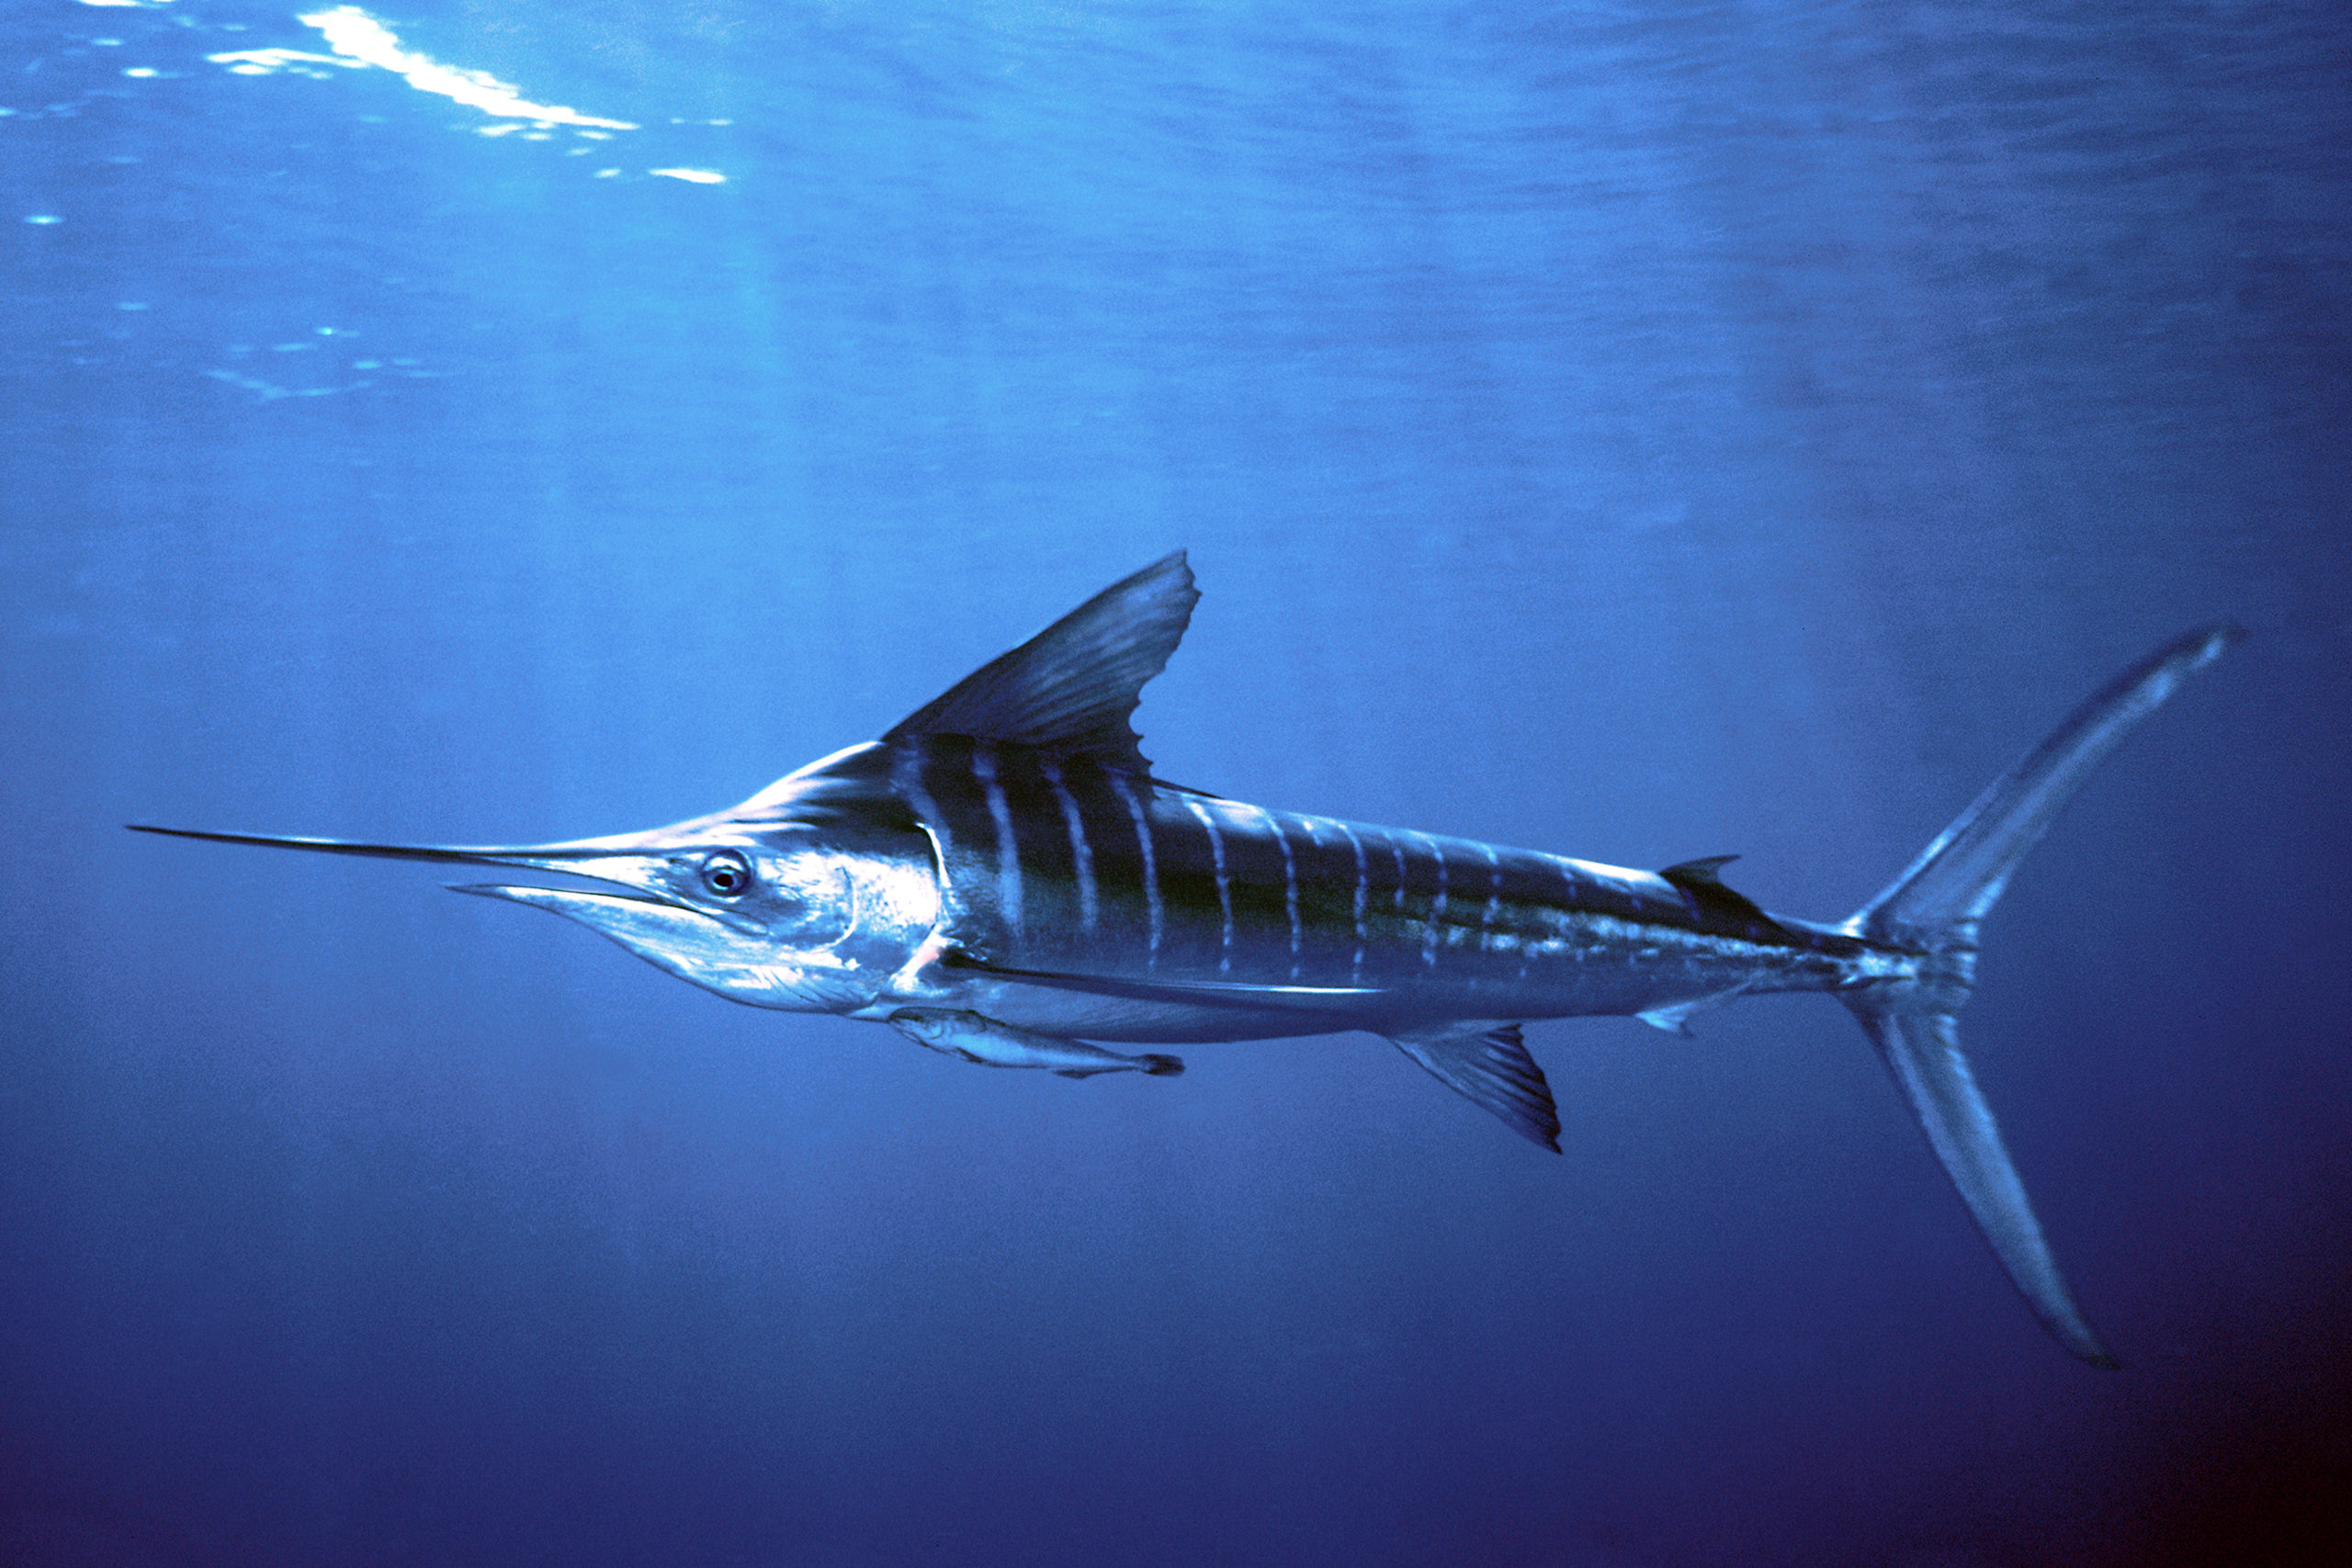 PRESS RELEASE: NEW HOPE FOR BILLFISH IN THE PACIFIC